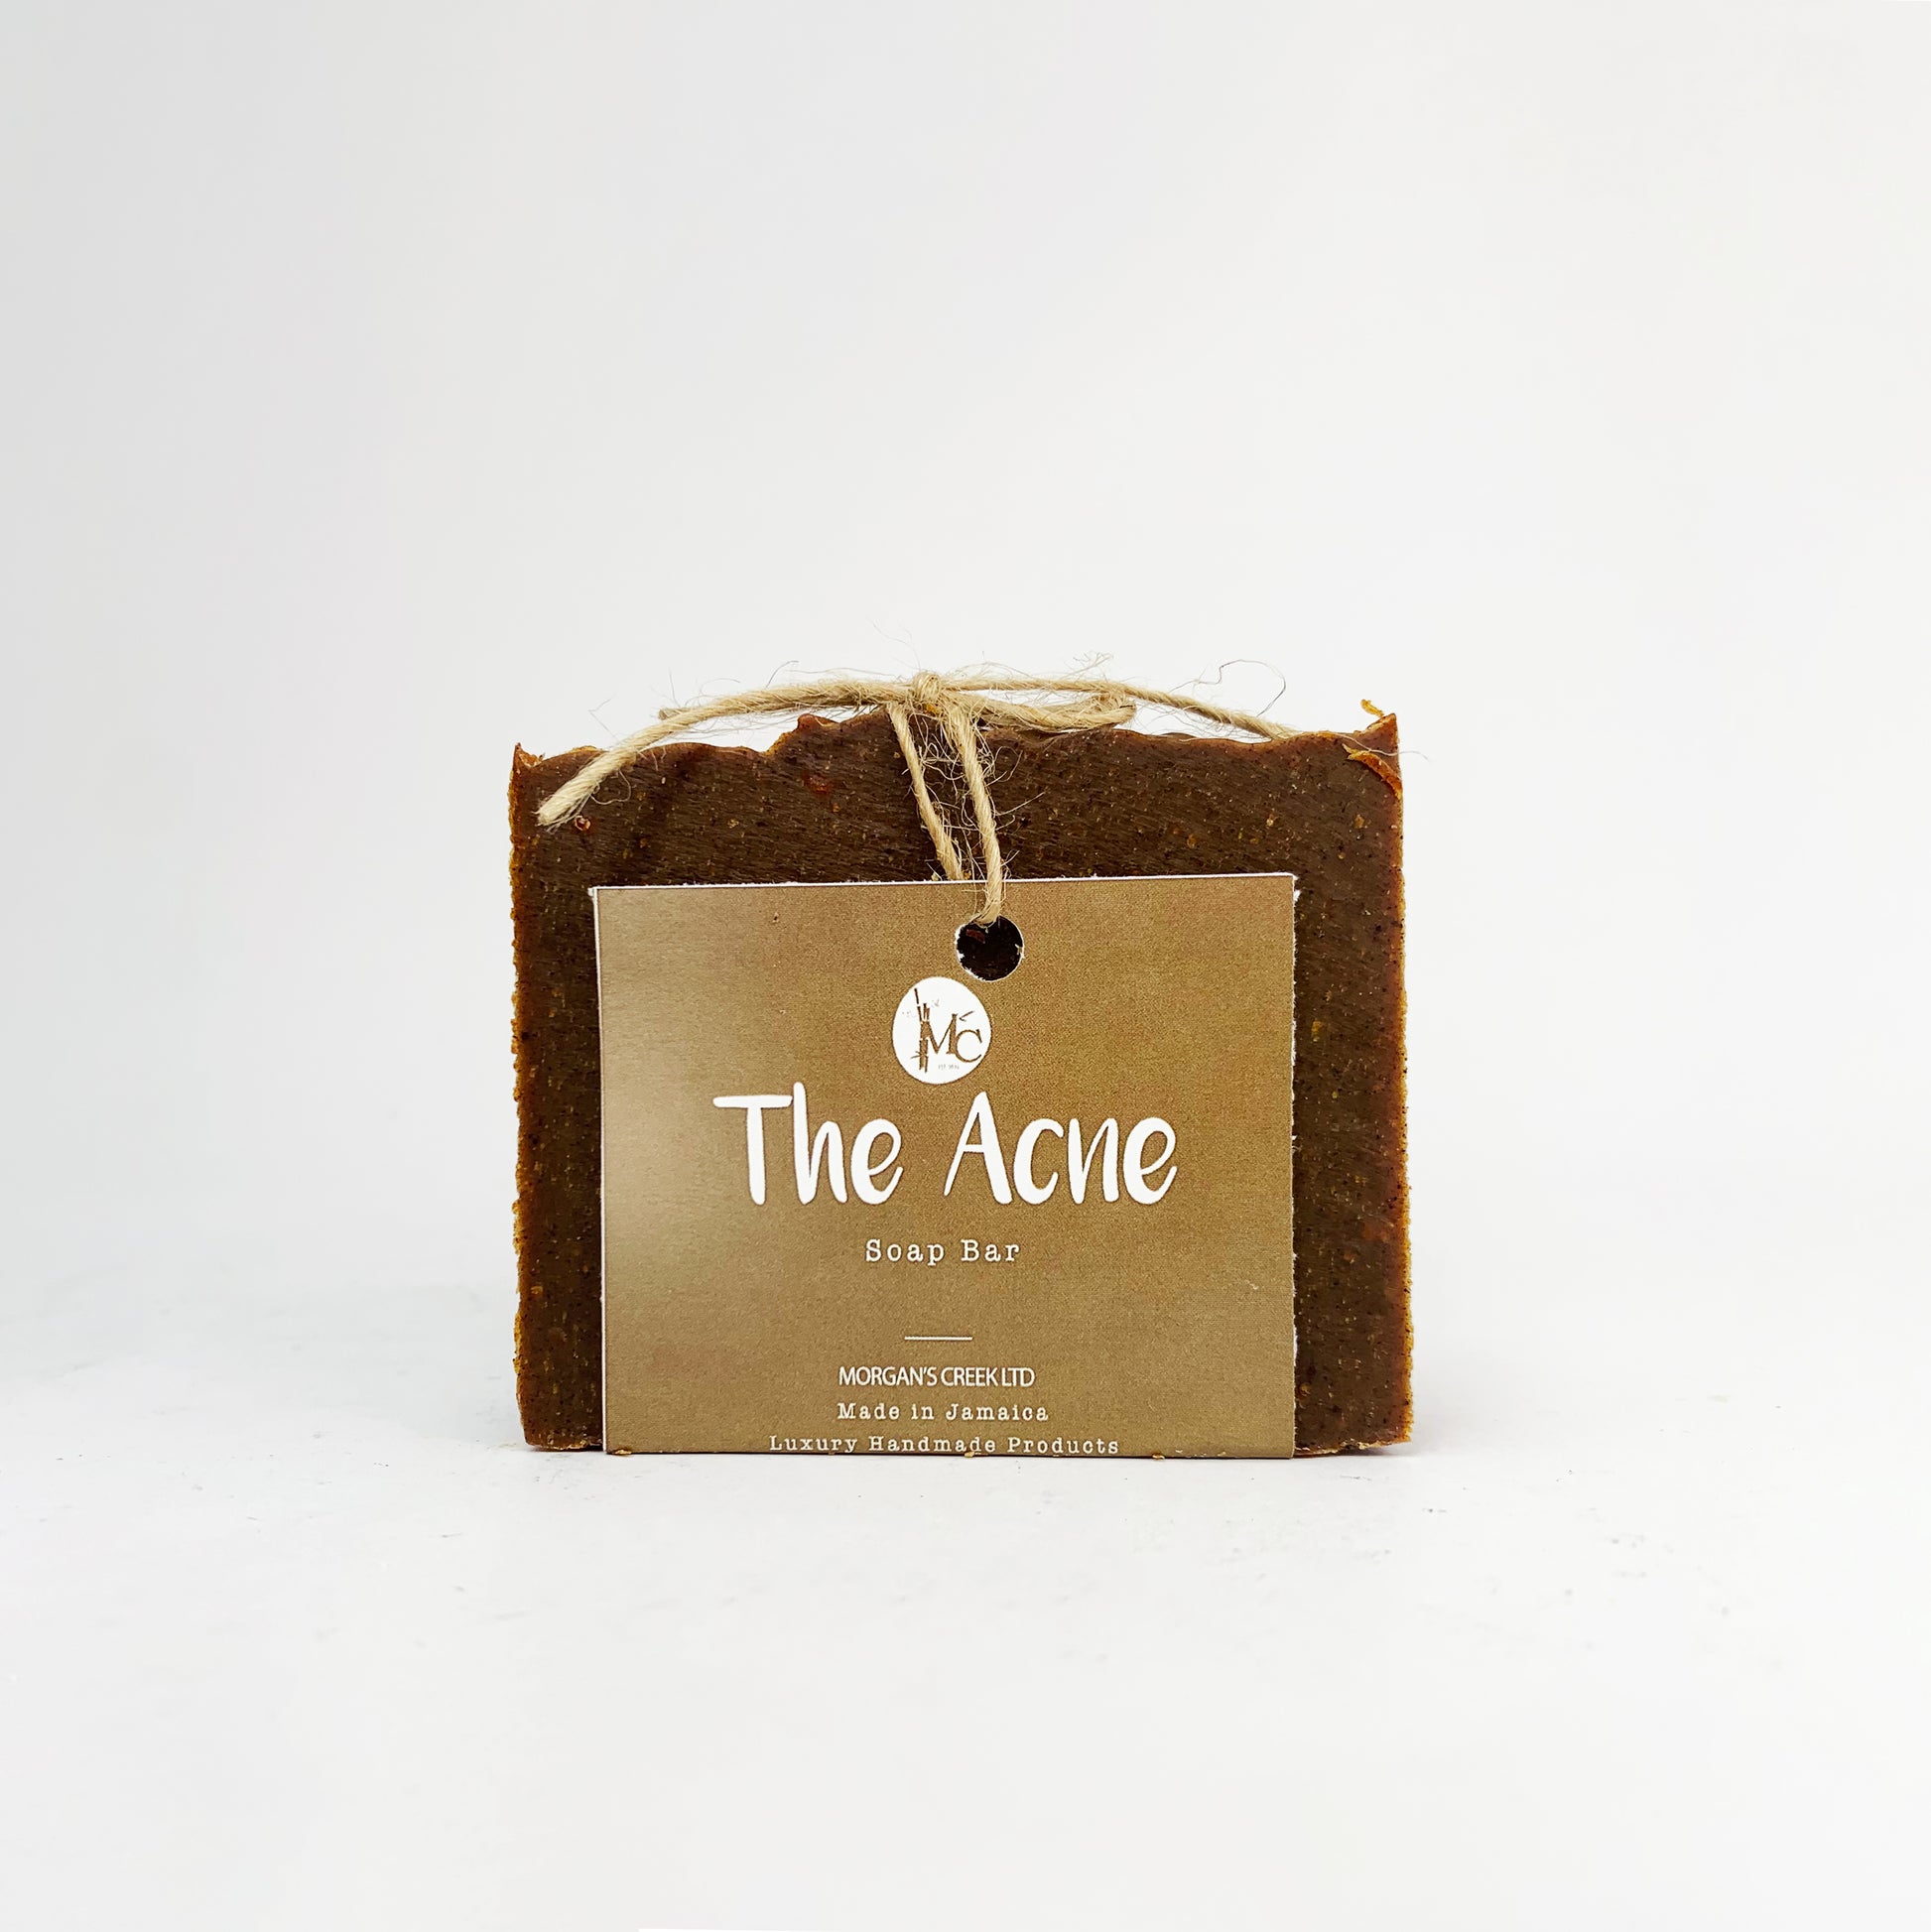 The Acne Soap by Morgan's Creek